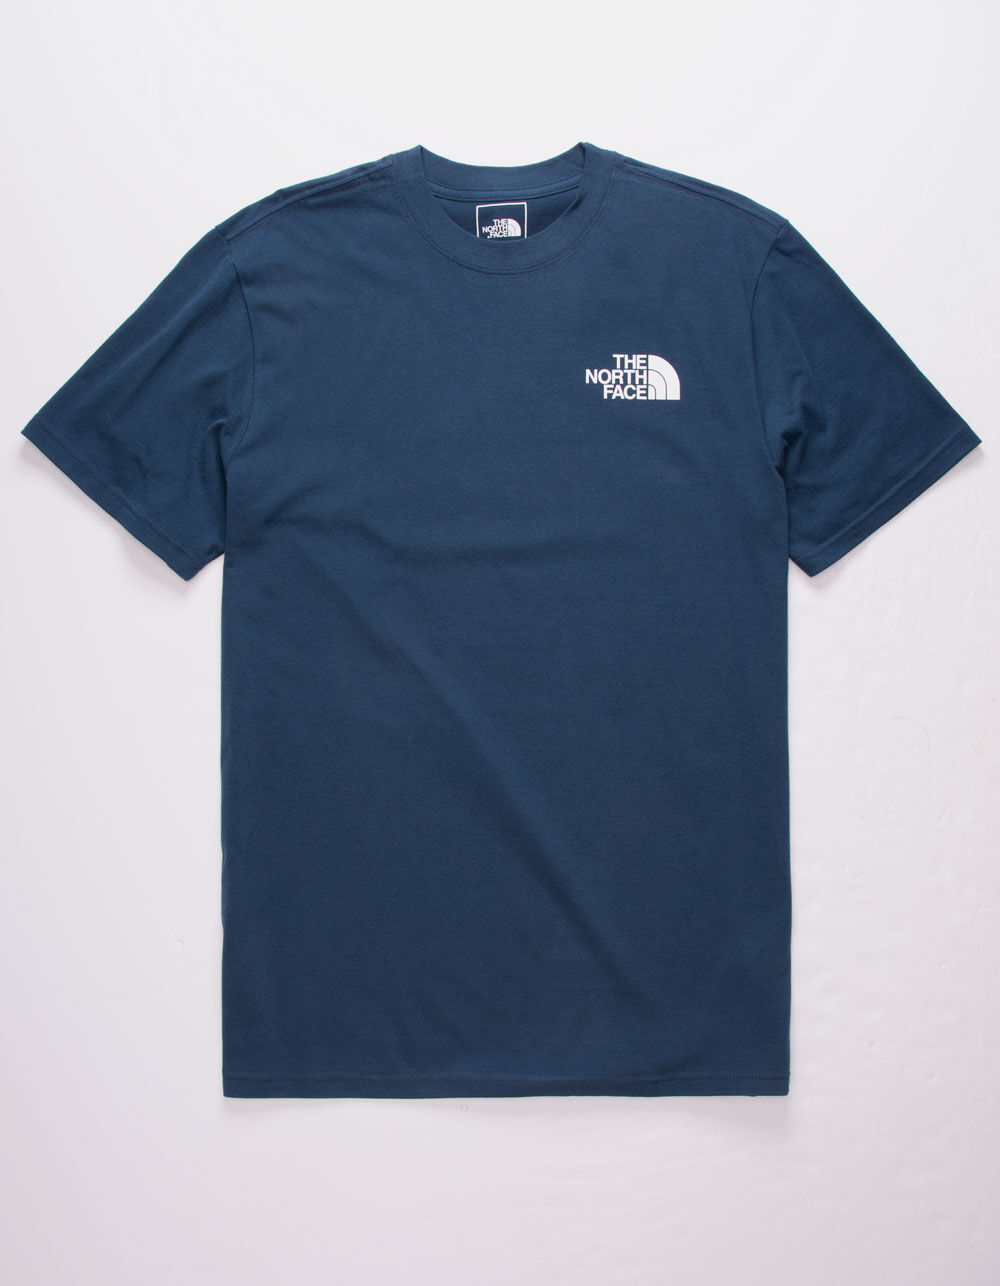 THE NORTH FACE Red Box Blue Wing Teal Mens T-Shirt - BLUE WING TEAL ...